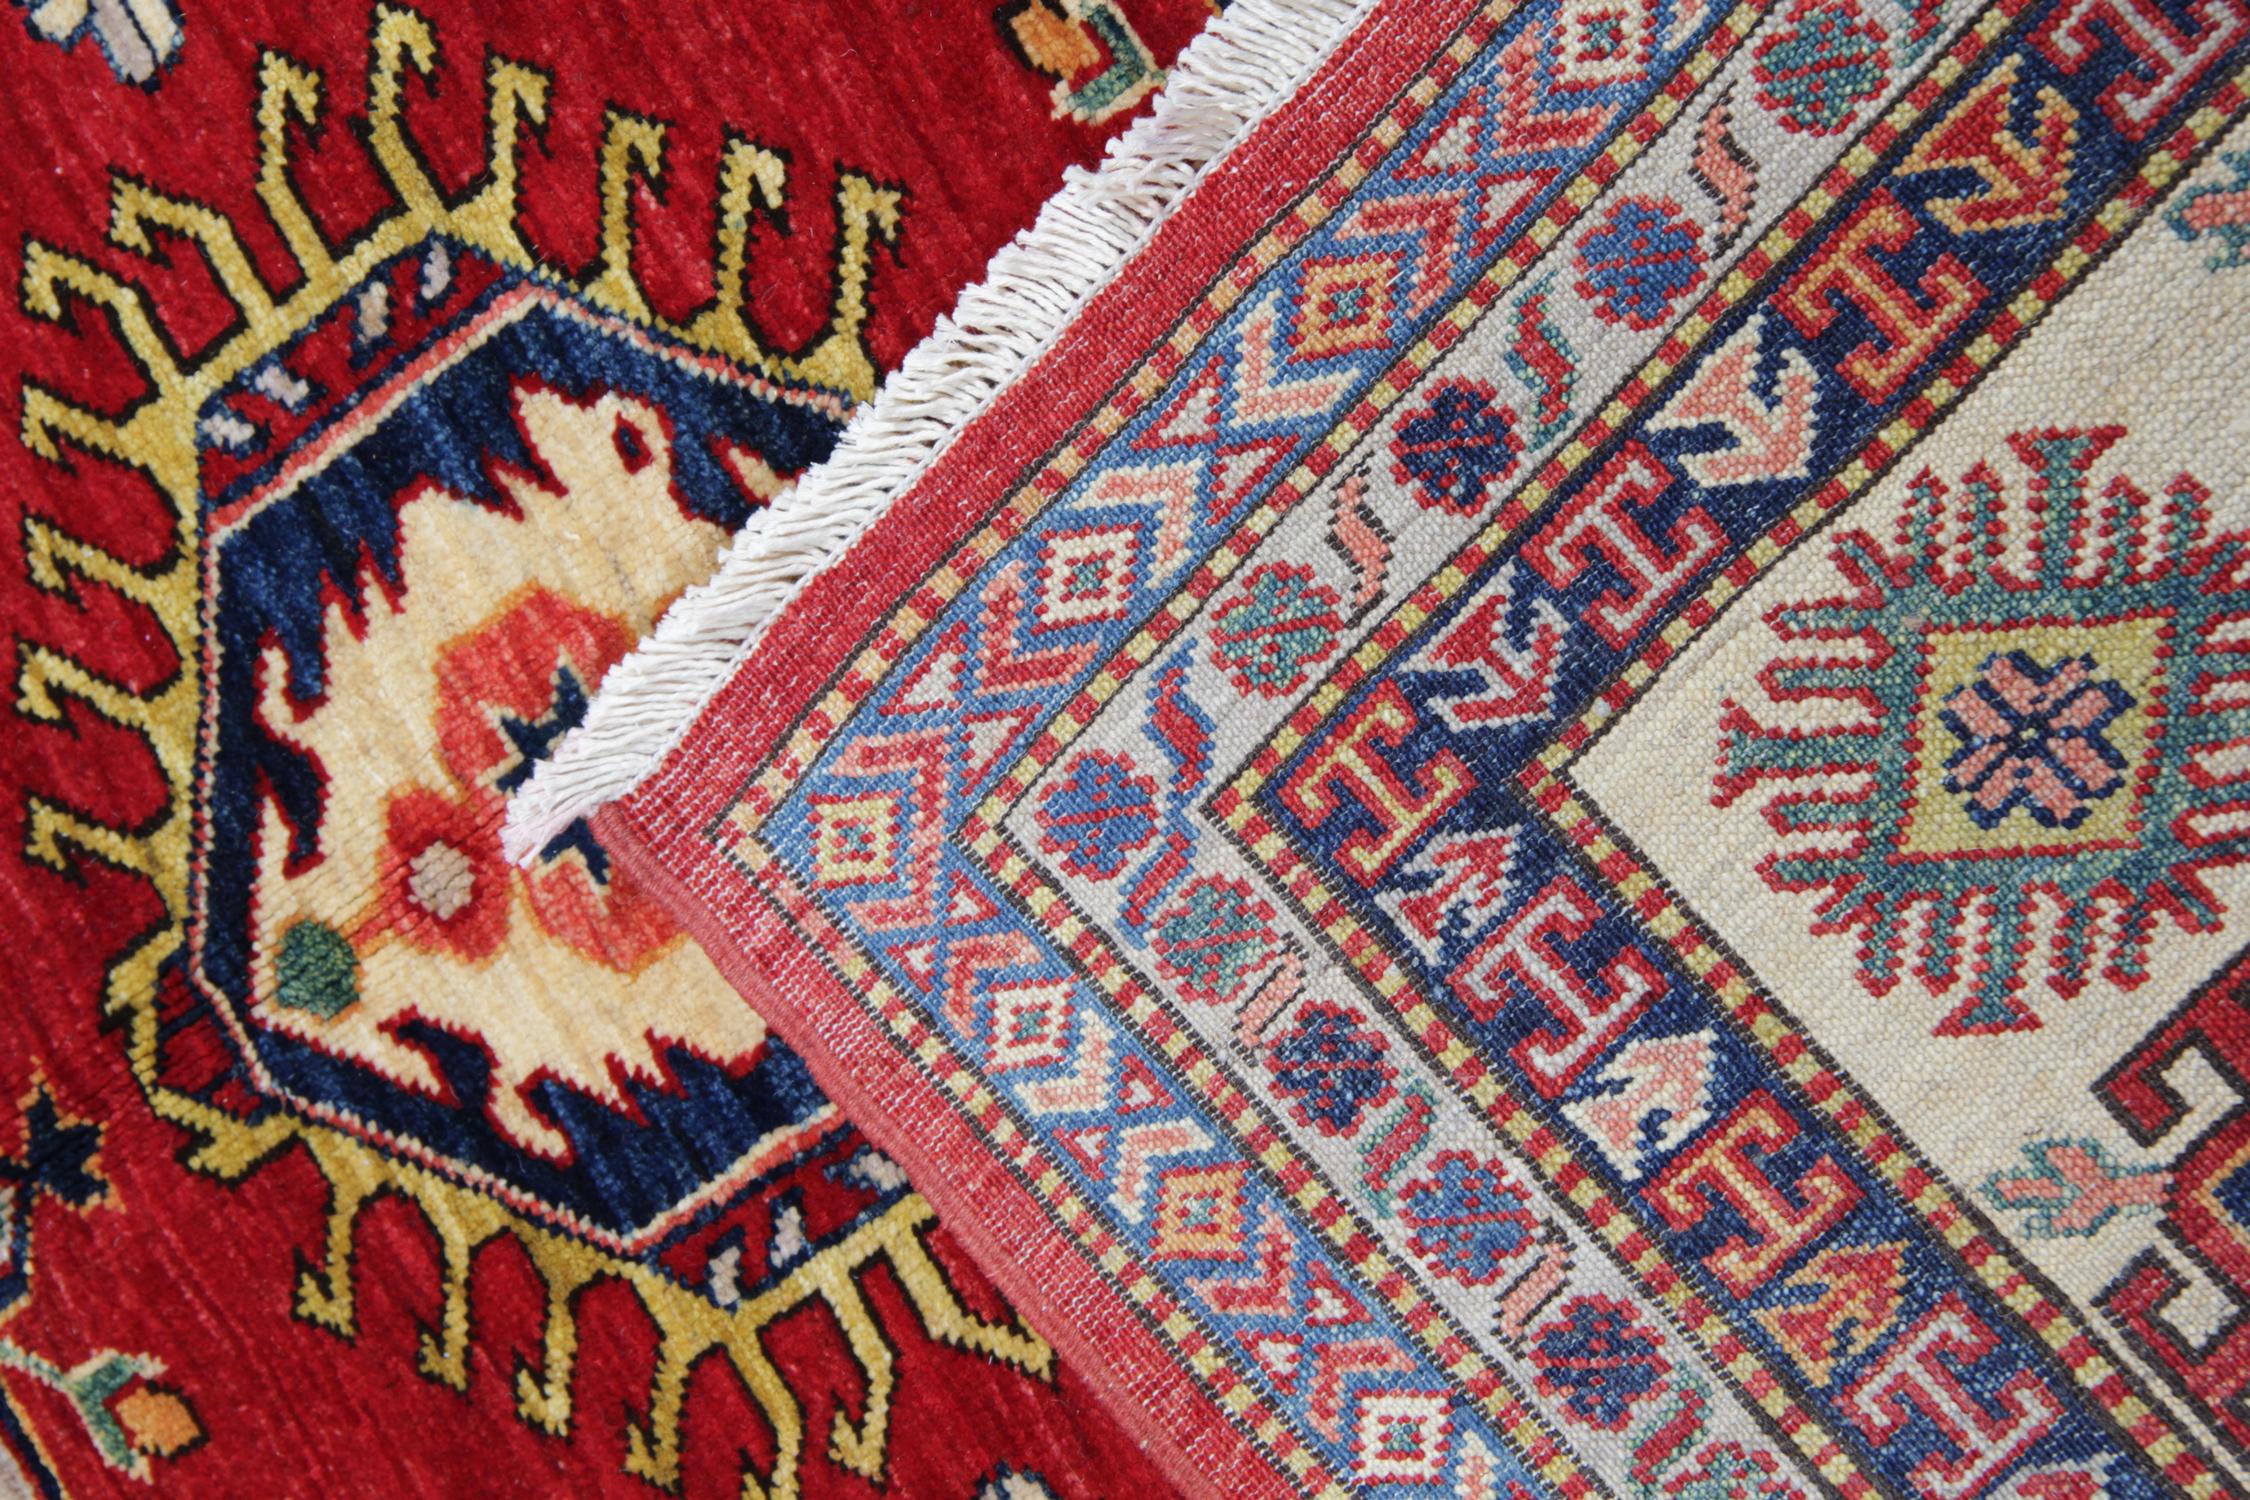 Oriental Rugs, Rustic Primitive Handmade Carpet Red Geometric Rugs 252 x 301 cm In Excellent Condition For Sale In Hampshire, GB